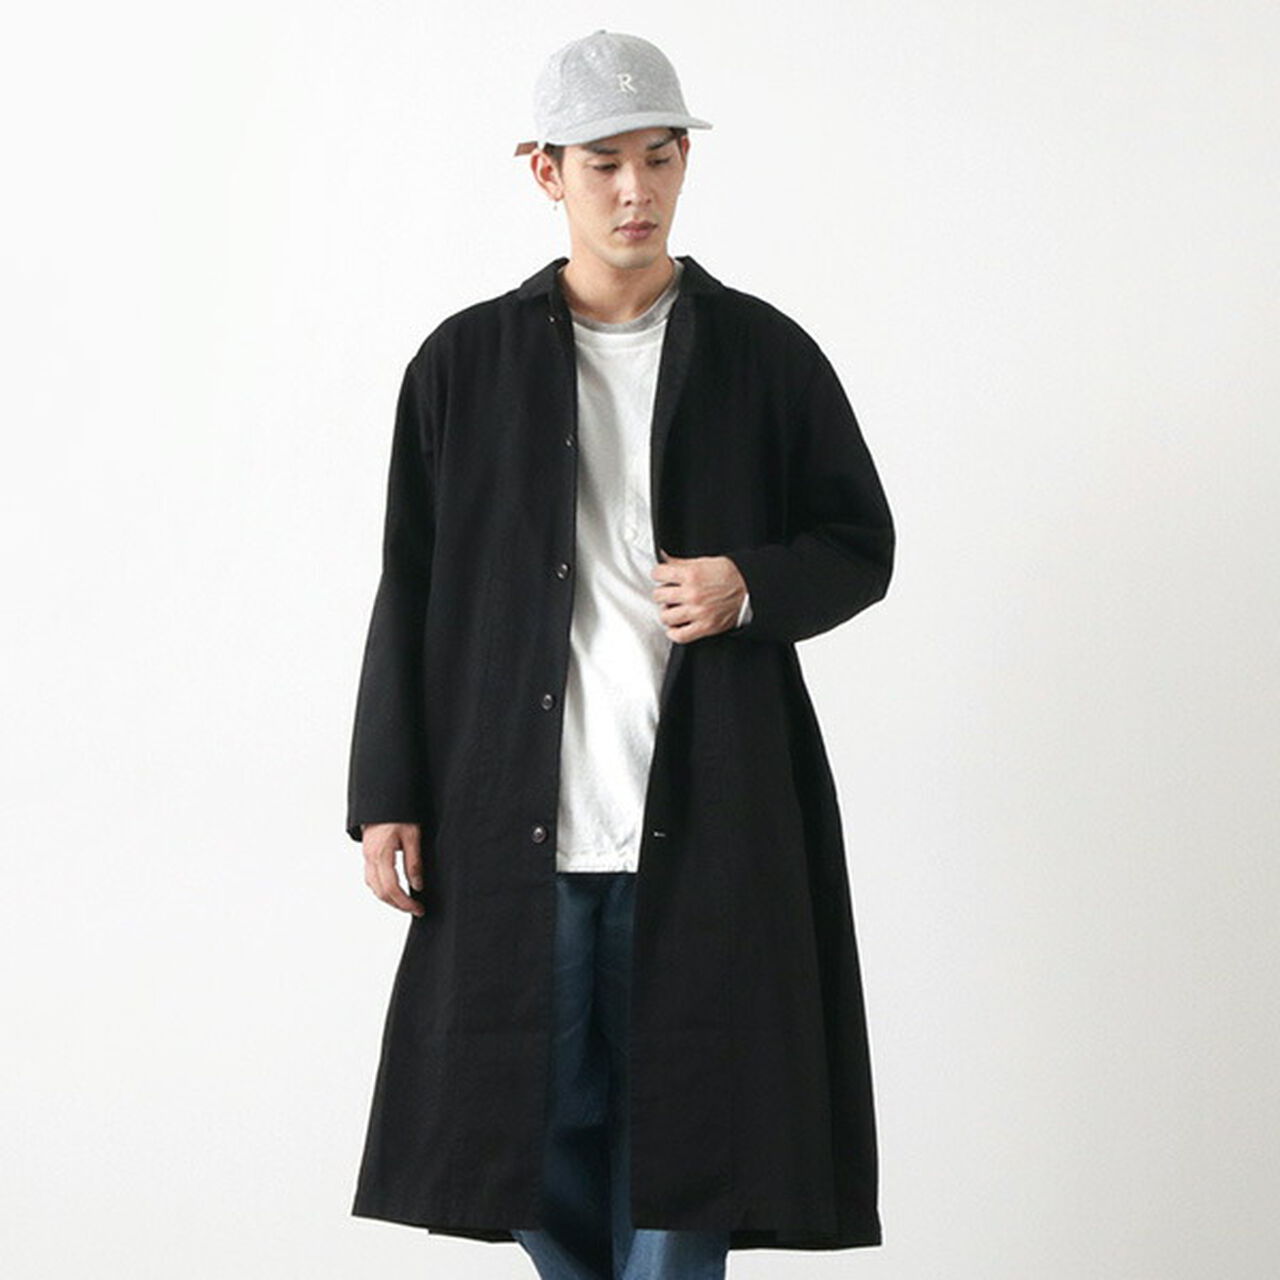 Chinocloth Overcoat,Black, large image number 0